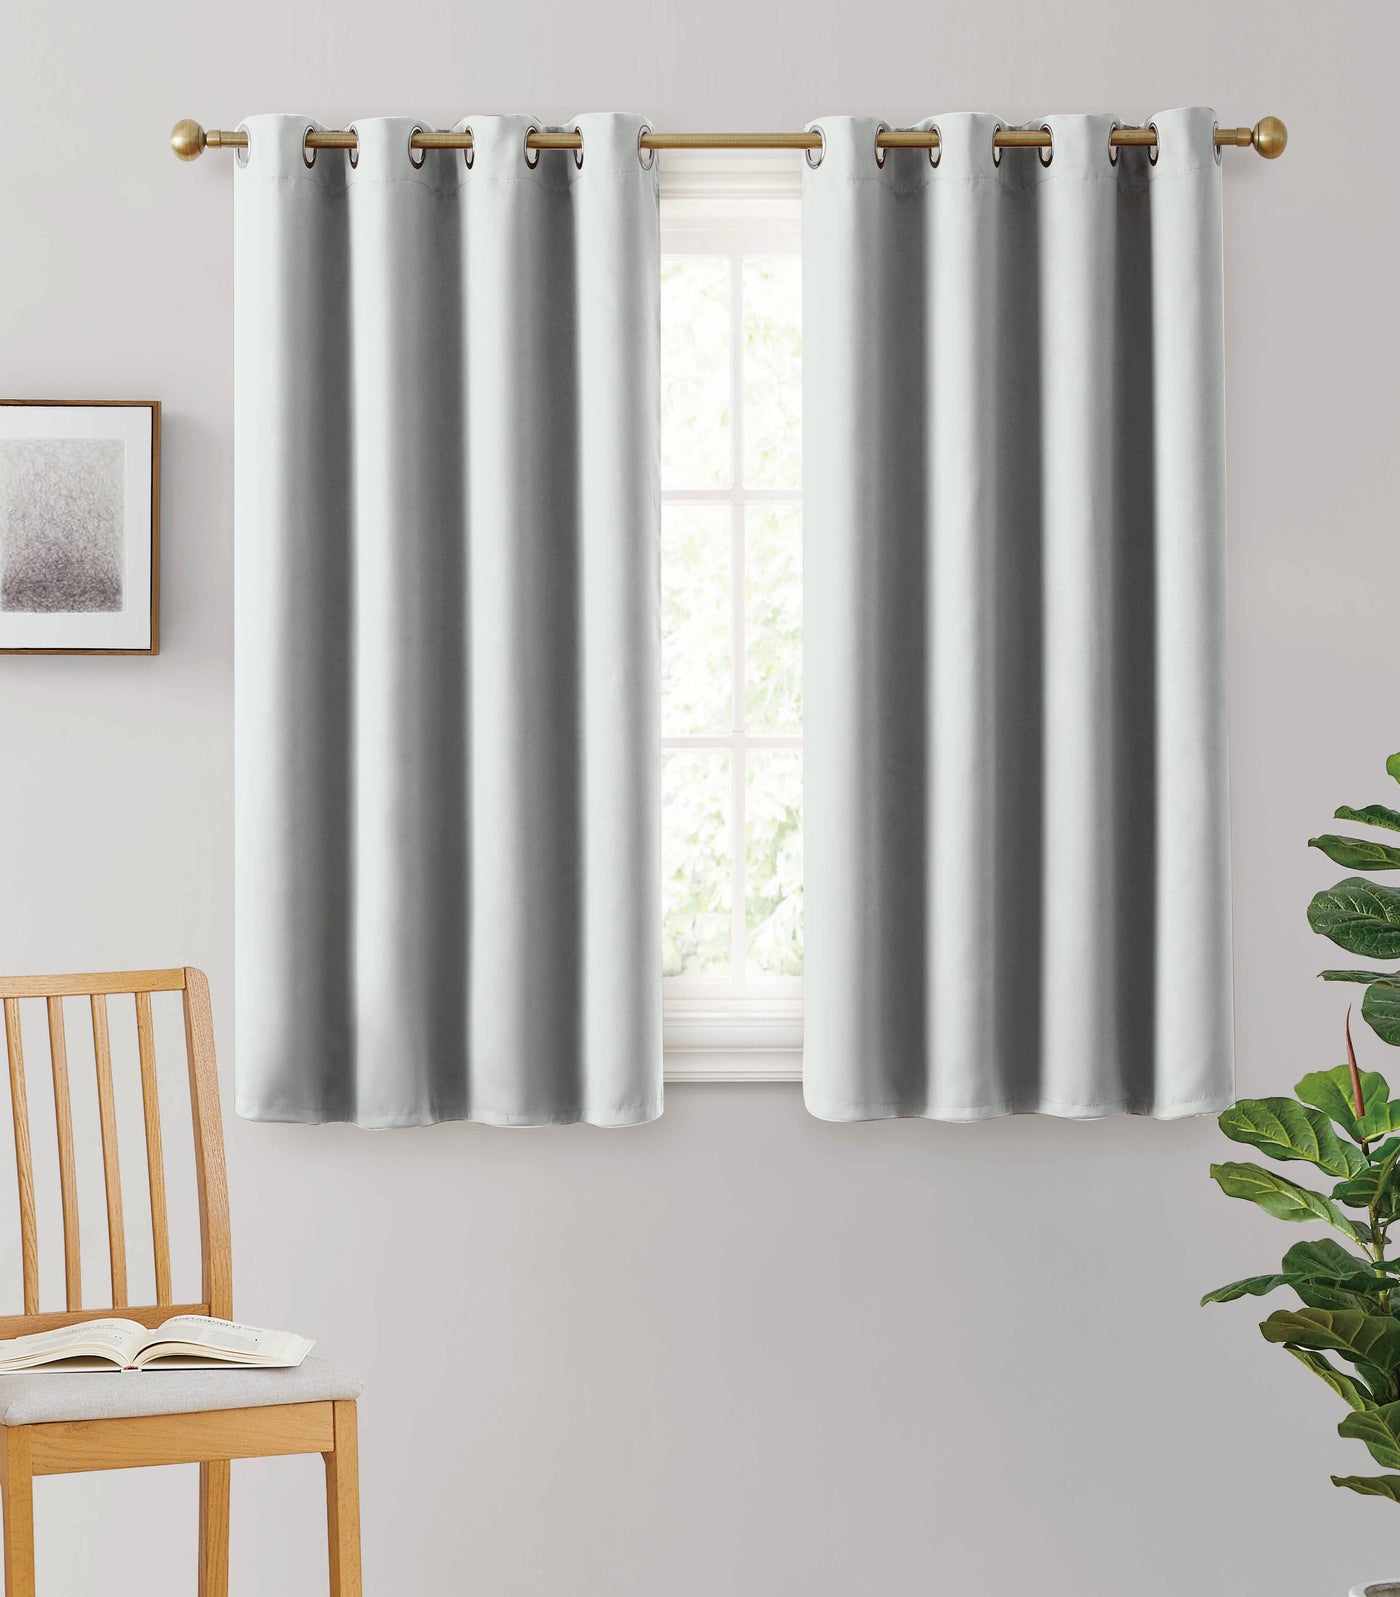 2pc Solid Grommet Thermal Insulated Window Curtain Panels Room Darkening Blackout 63"